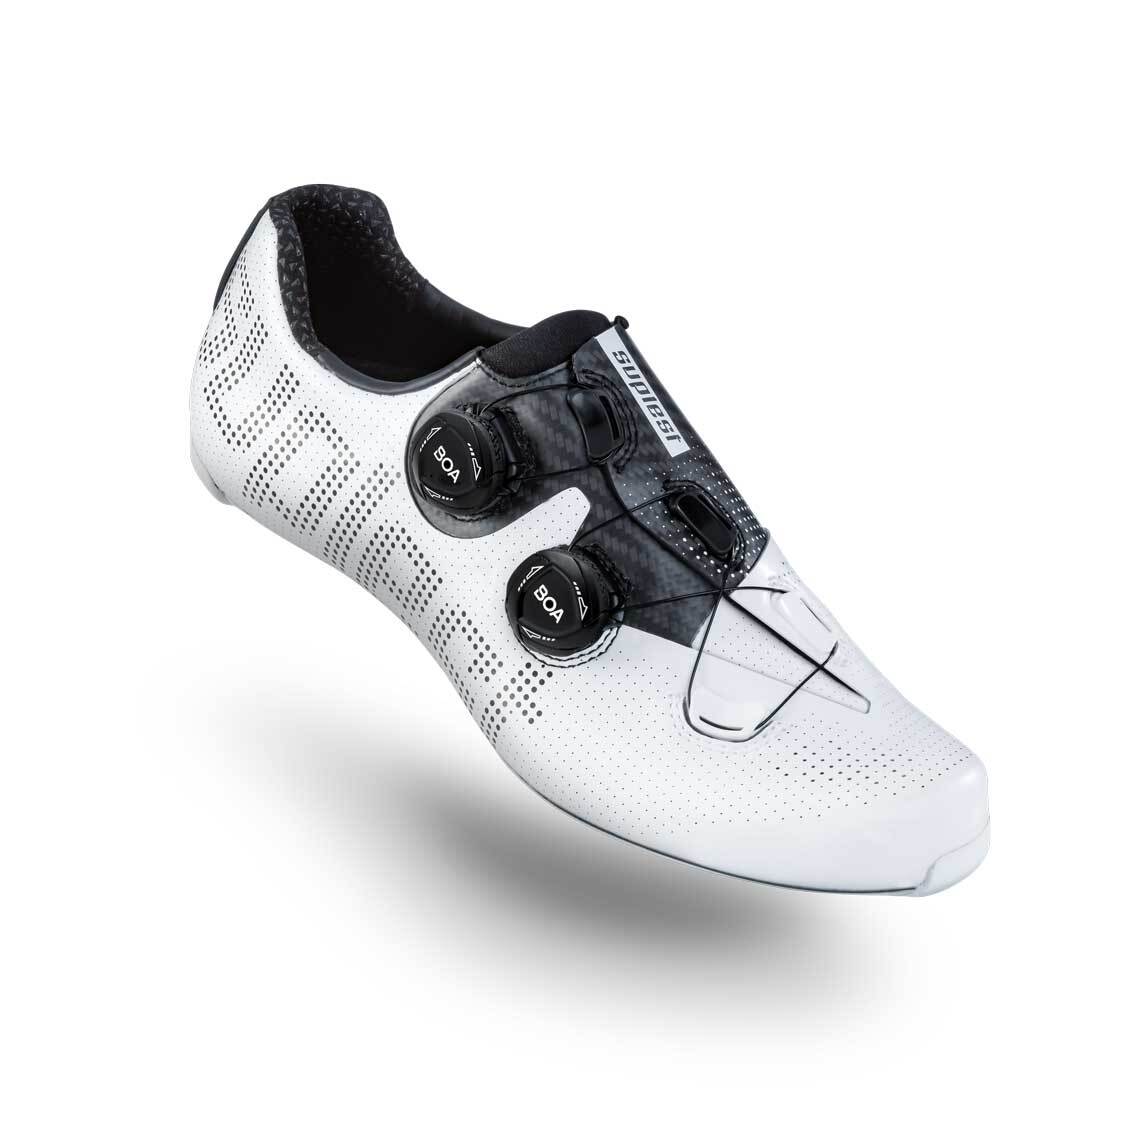 Download 2020 Suplest Edge+ Pro Road Carbon Cycling Shoes - White ...